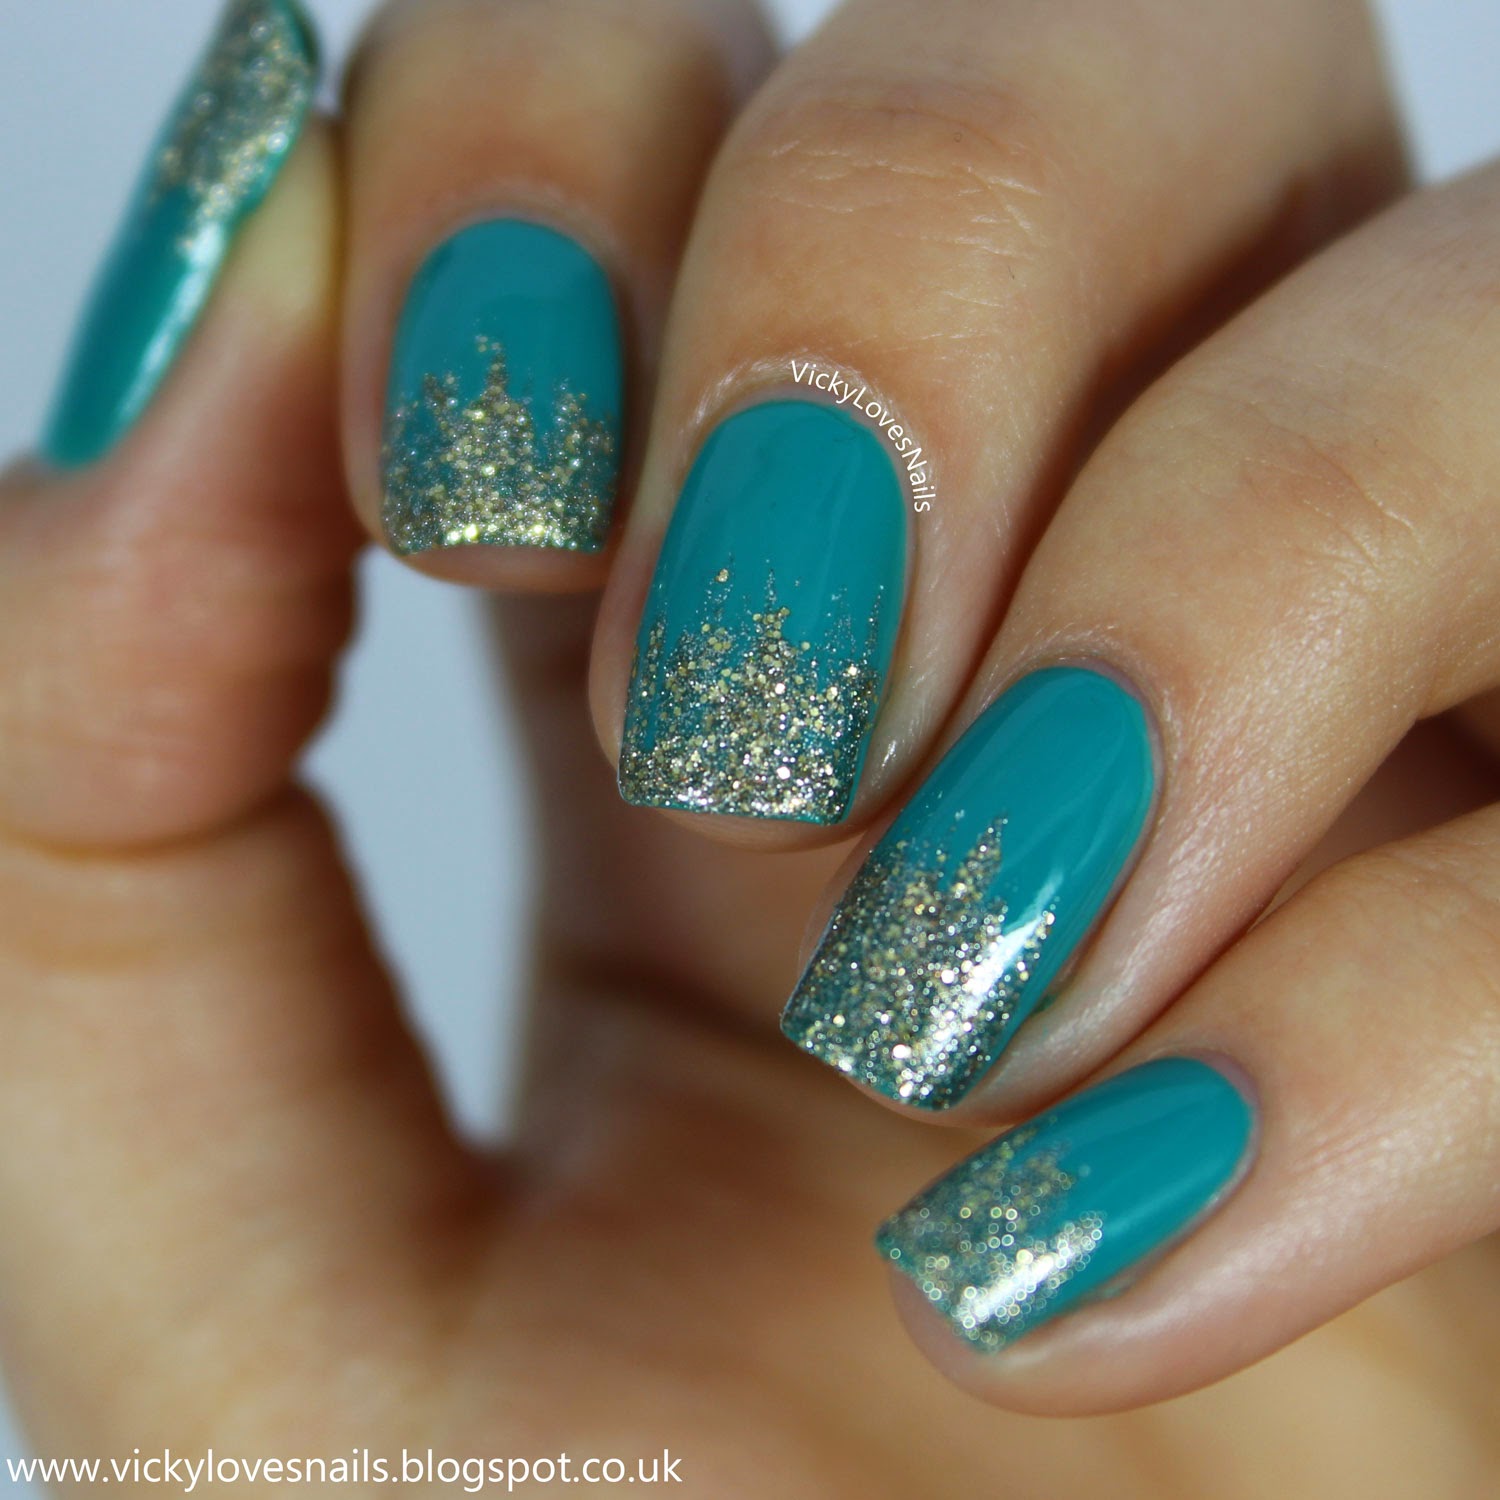 Vicky Loves Nails!: Teal and Gold Glitter Tips